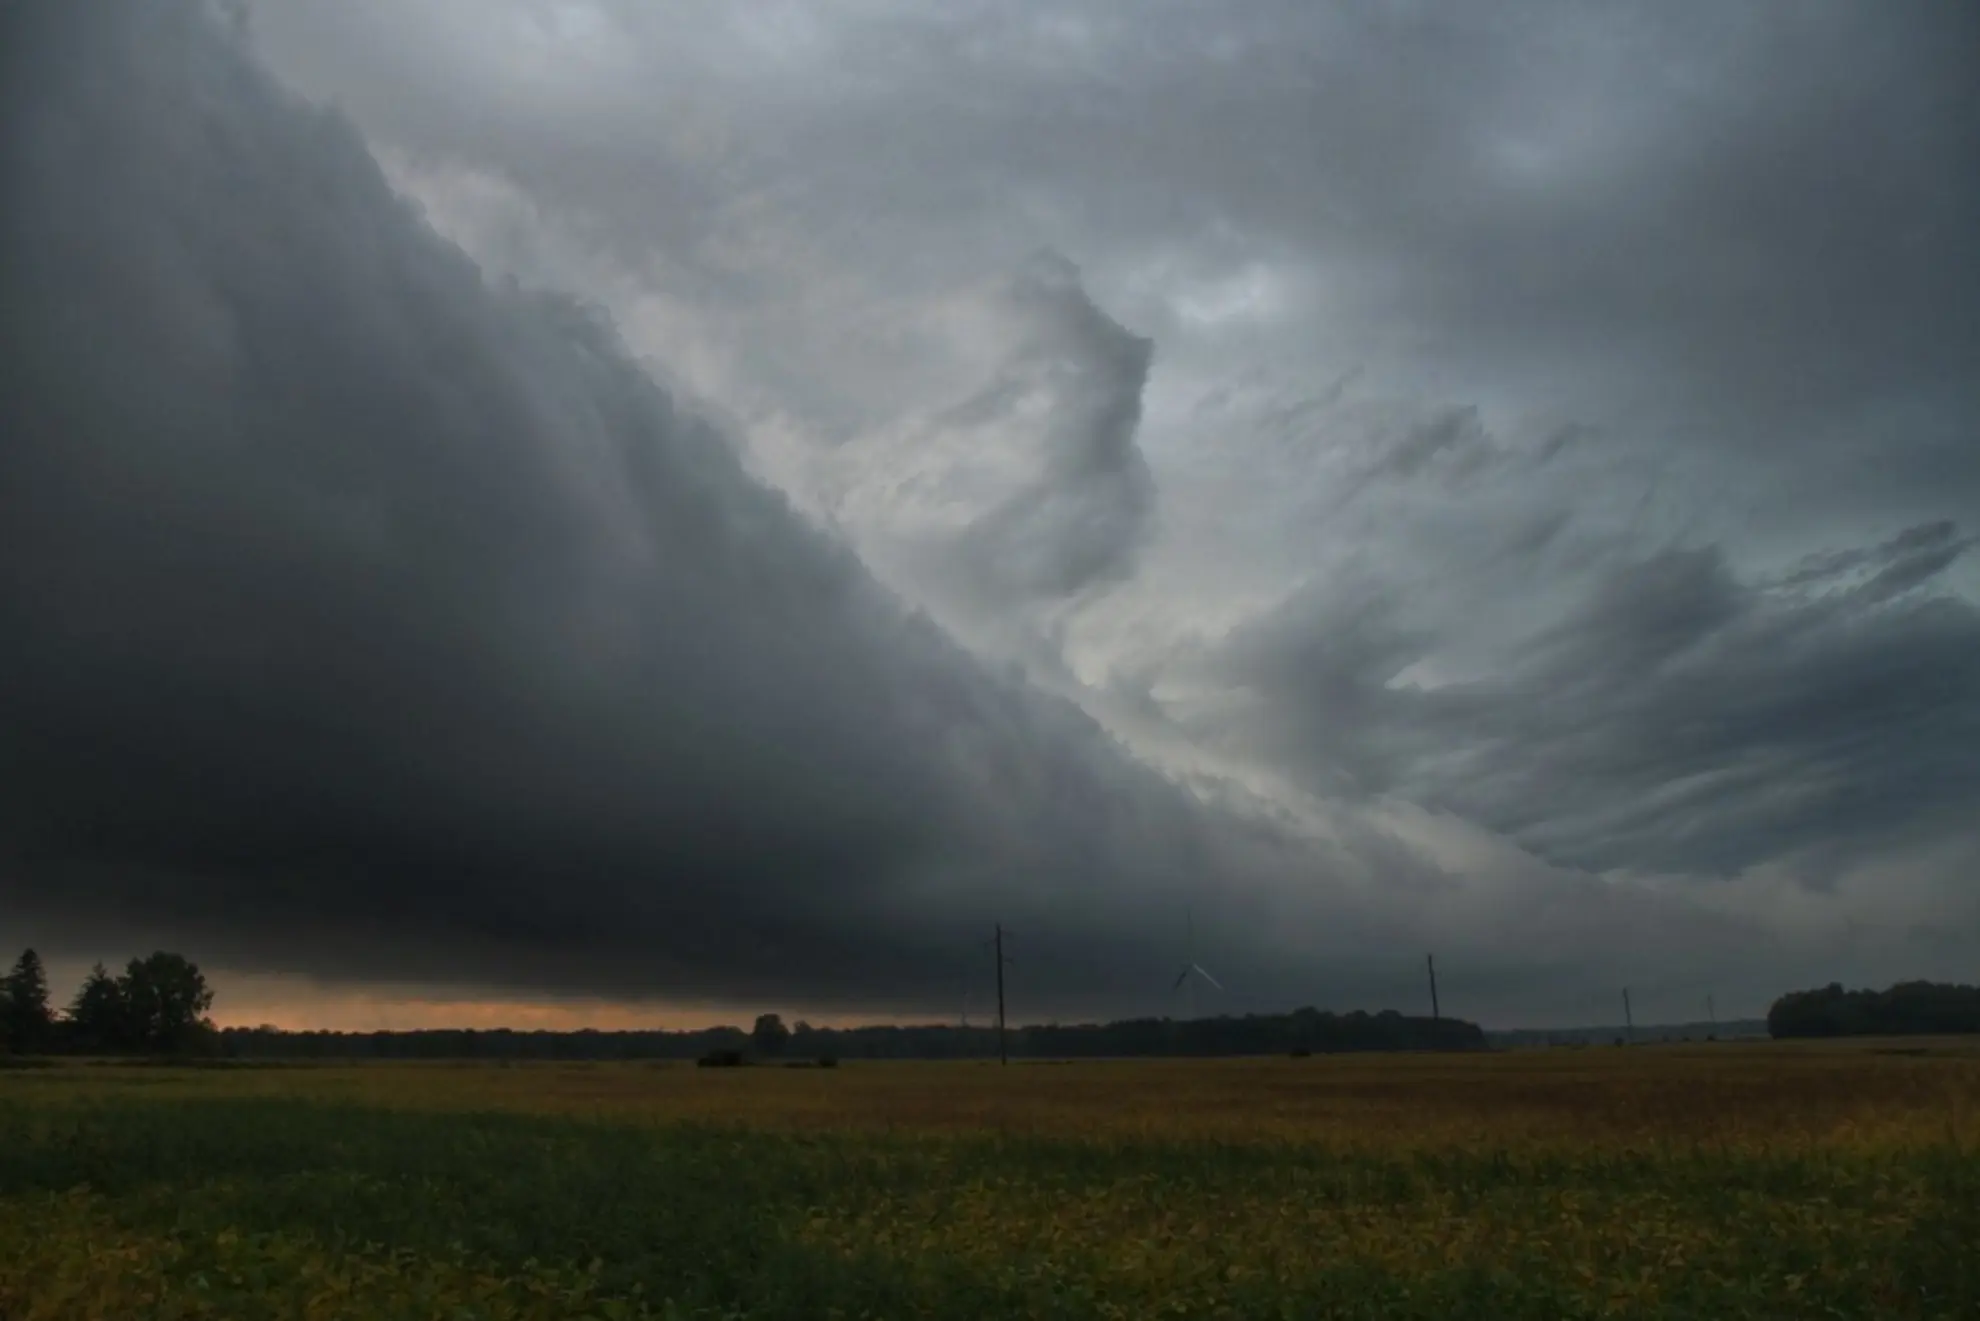 Canada is witnessing more thunderstorm impacts than ever before